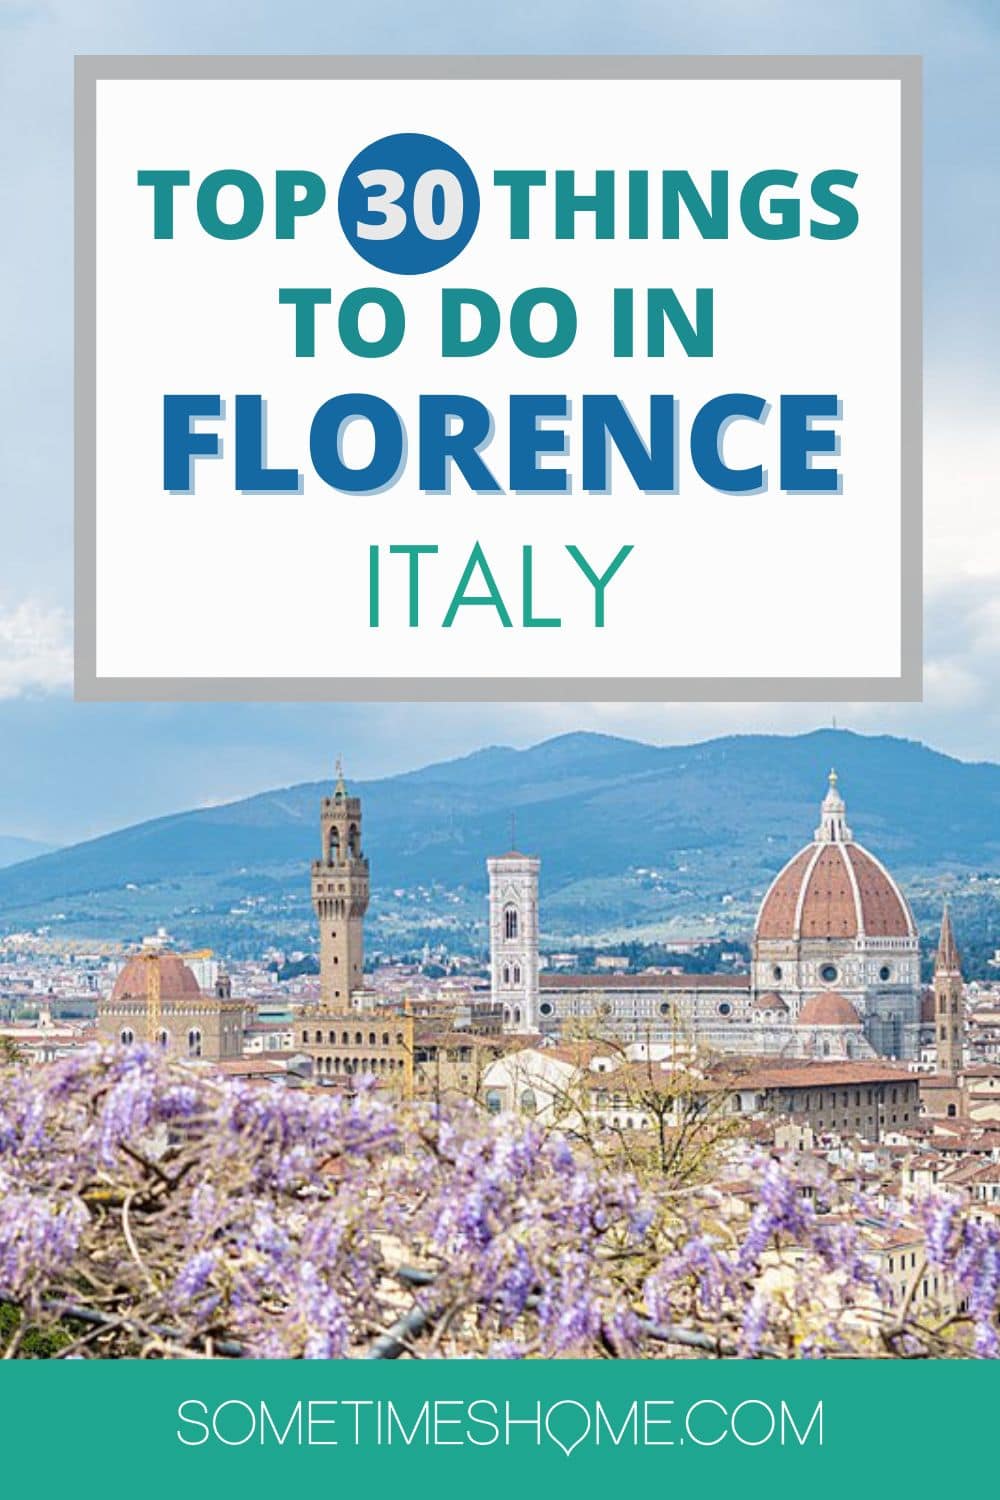 Top 30 things to do in Florence, Italy with an aerial photo of the city from Bardini gardens.